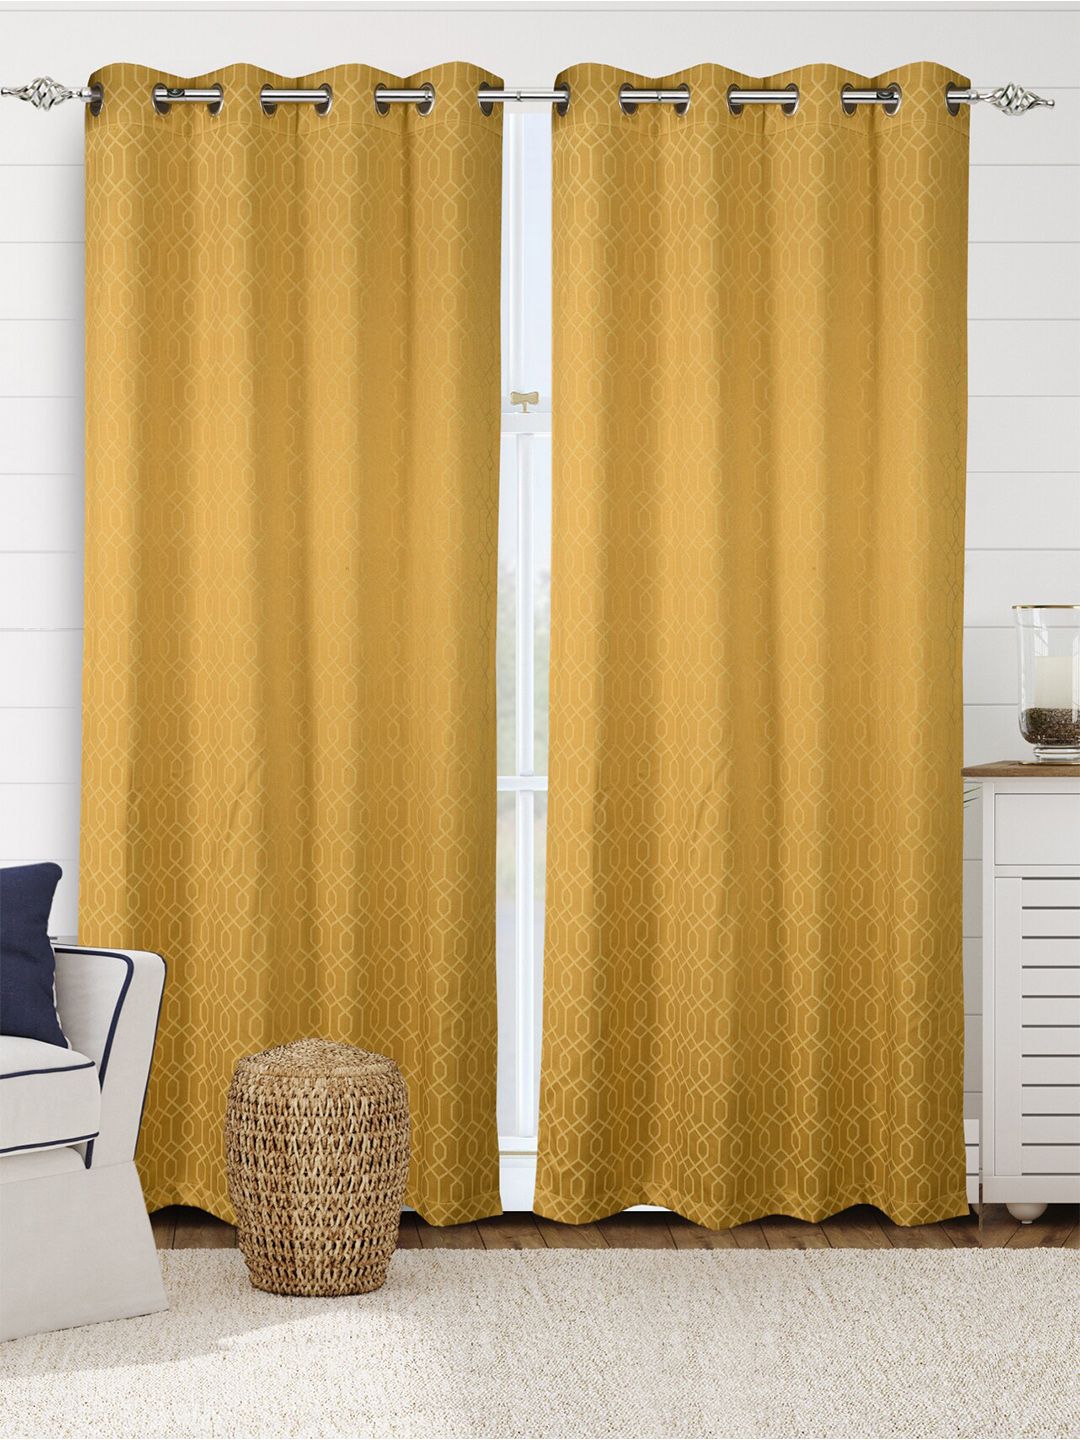 Saral Home Yellow Set of 2 Black Out Cotton Door Curtains Price in India